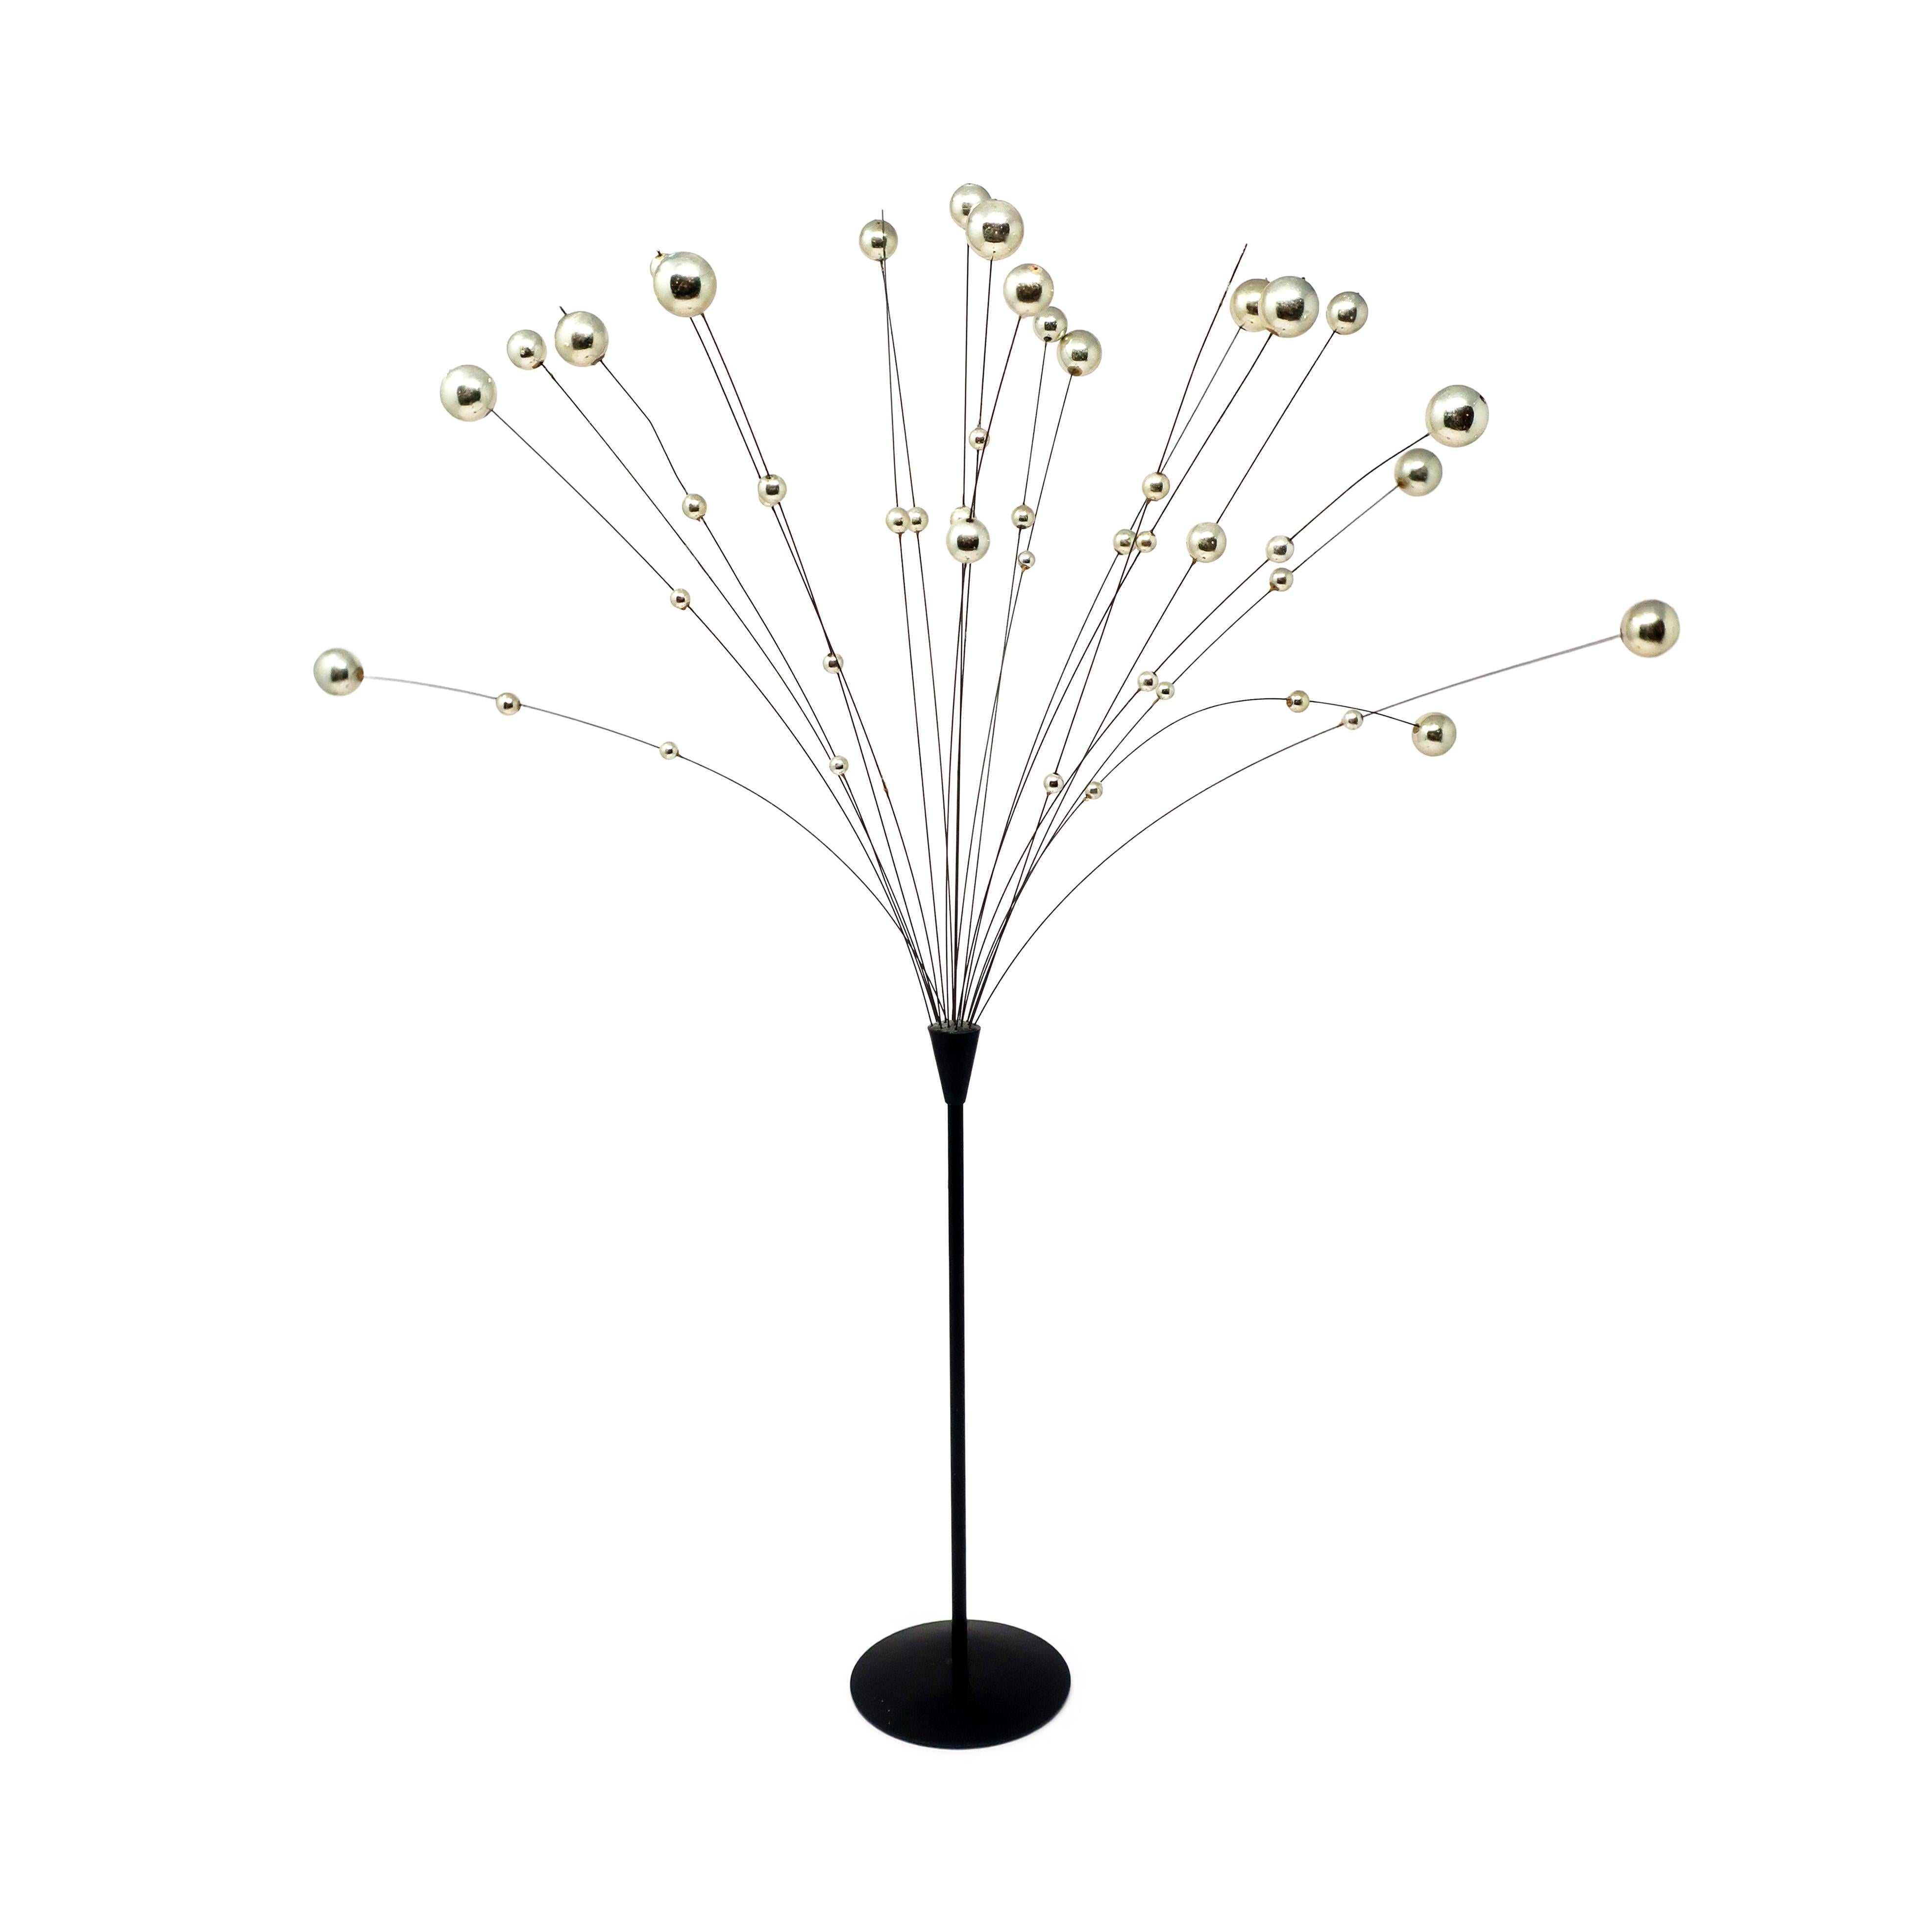 A vintage kinetic ball sculpture in black and silver by Laurids Lonborg, a Danish housewares and decorative objects powerhouse.  Black metal base and stem, silver metal wires, and polished silver colored balls that gently sway with any movement,